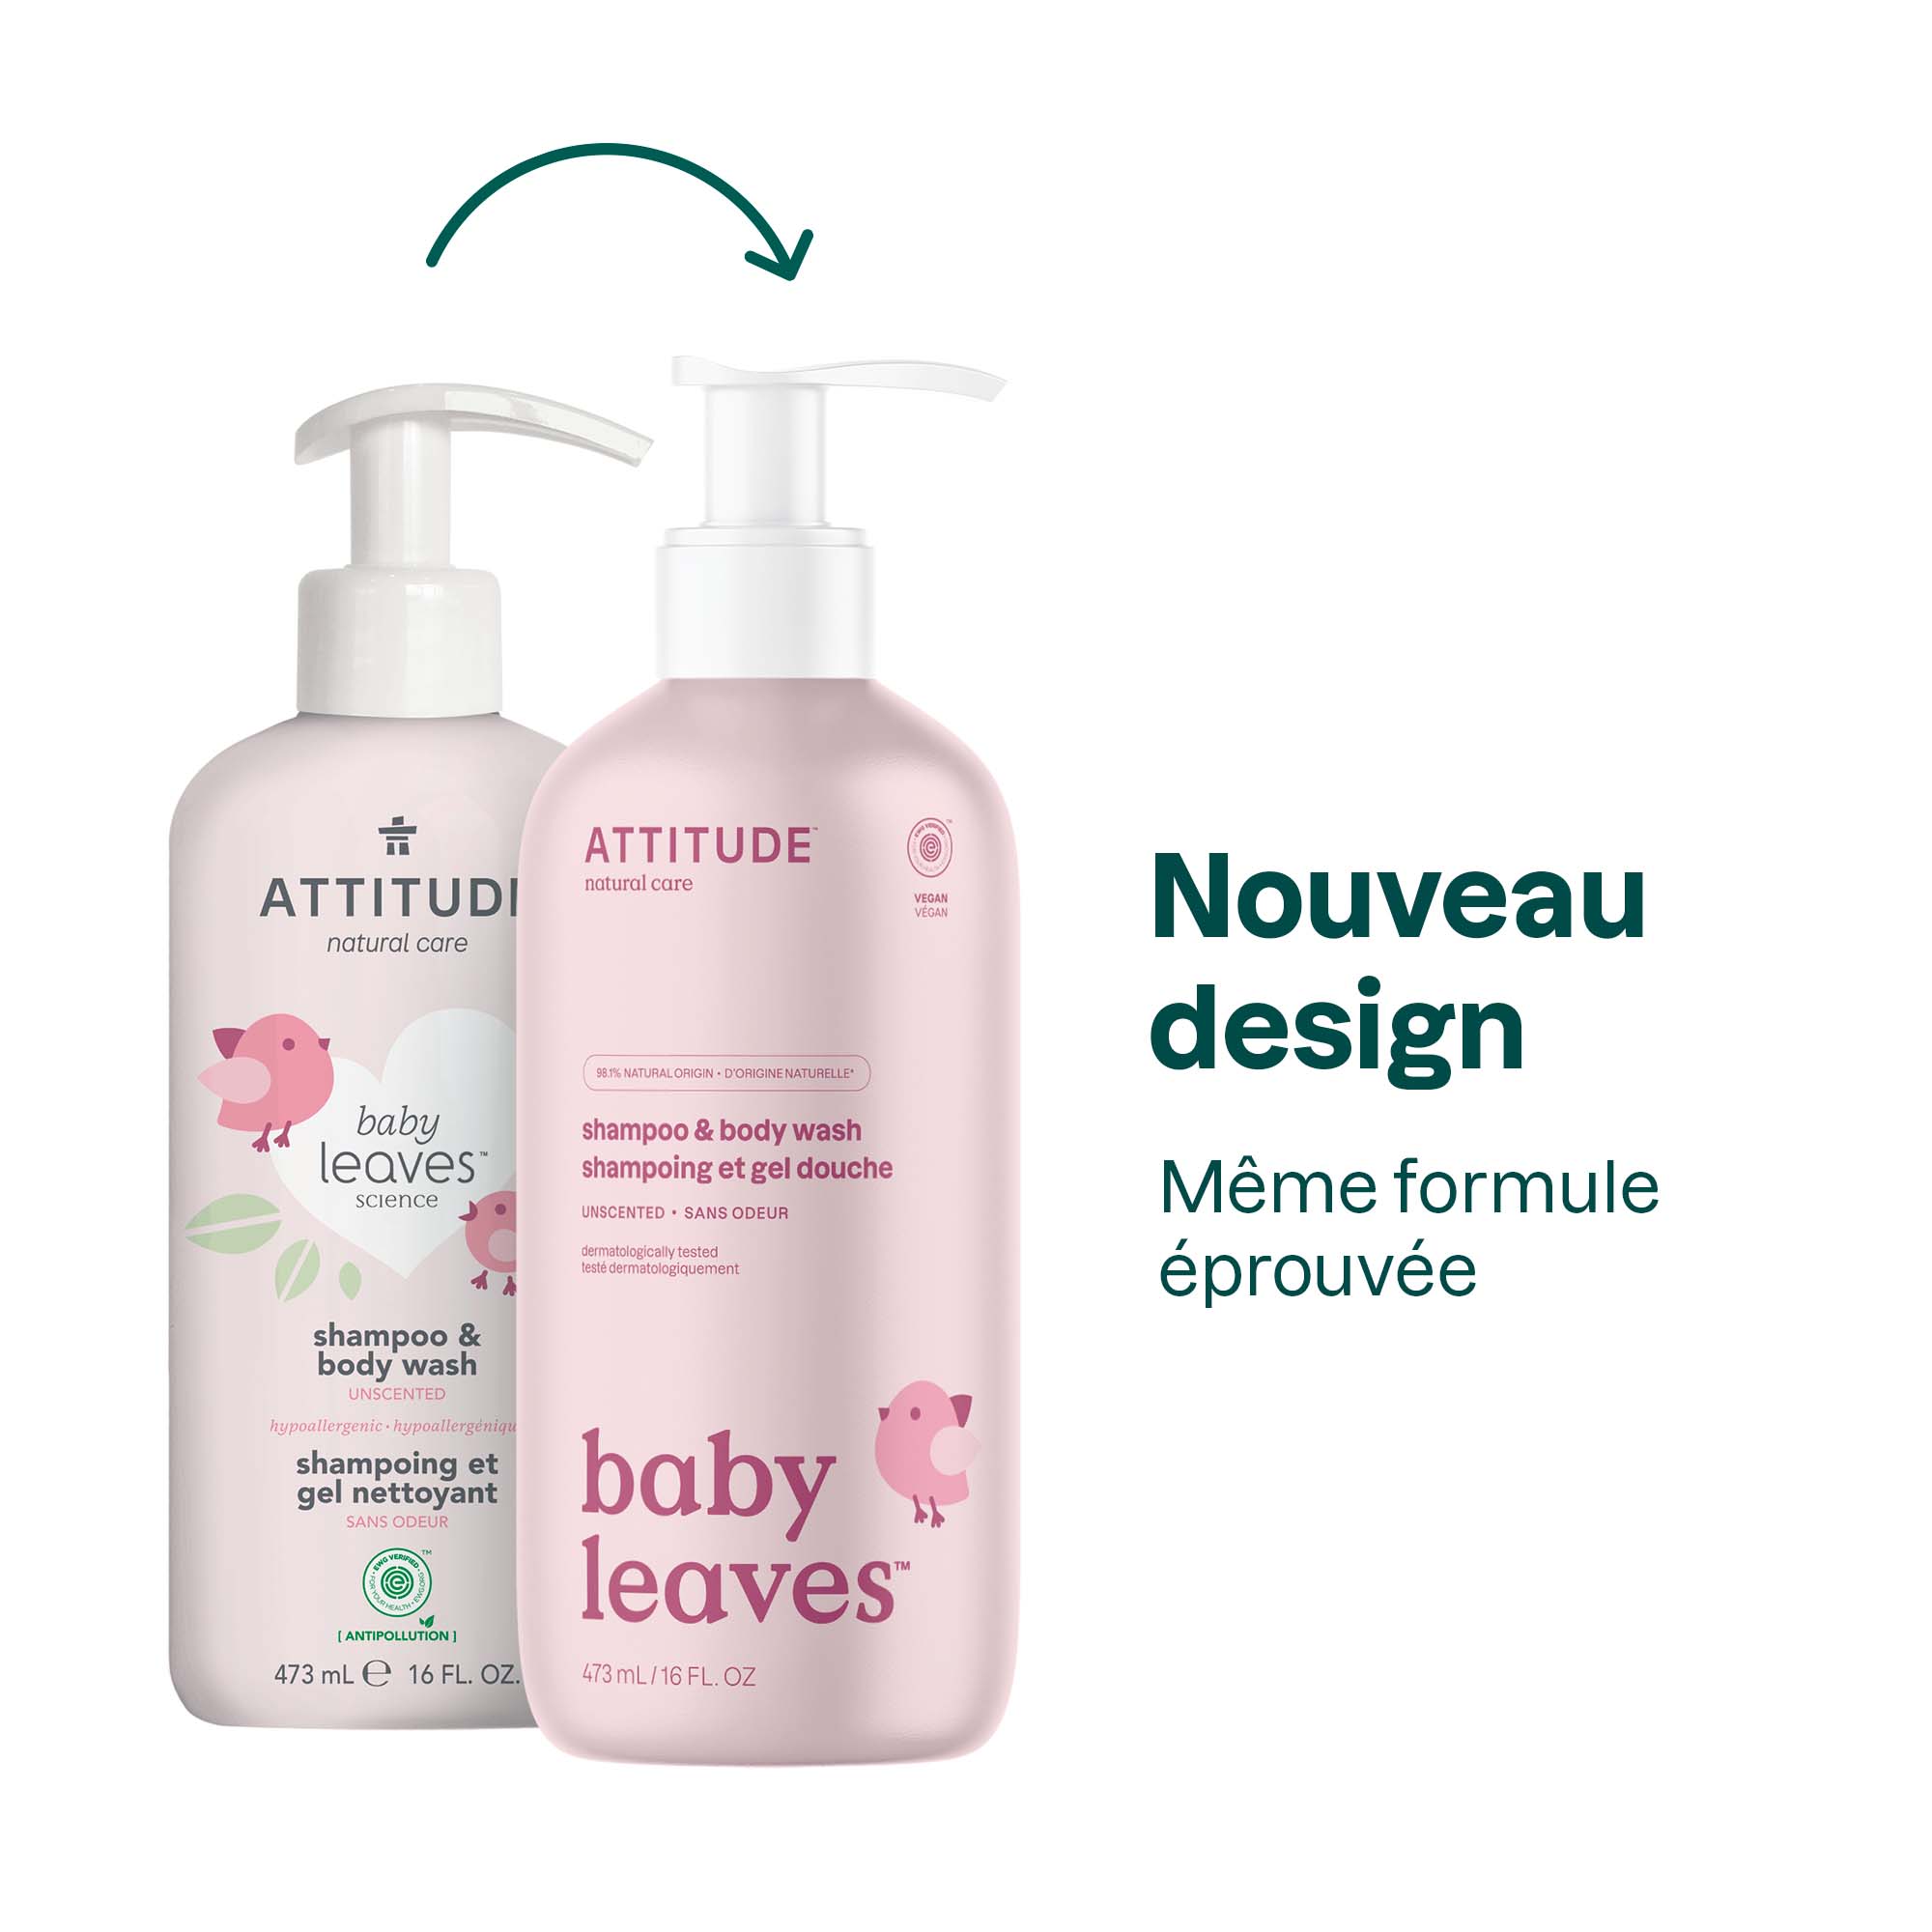 ATTITUDE baby leaves™ 2-In-1 Shampoo and Body Wash Unscented 16615_en? Unscented